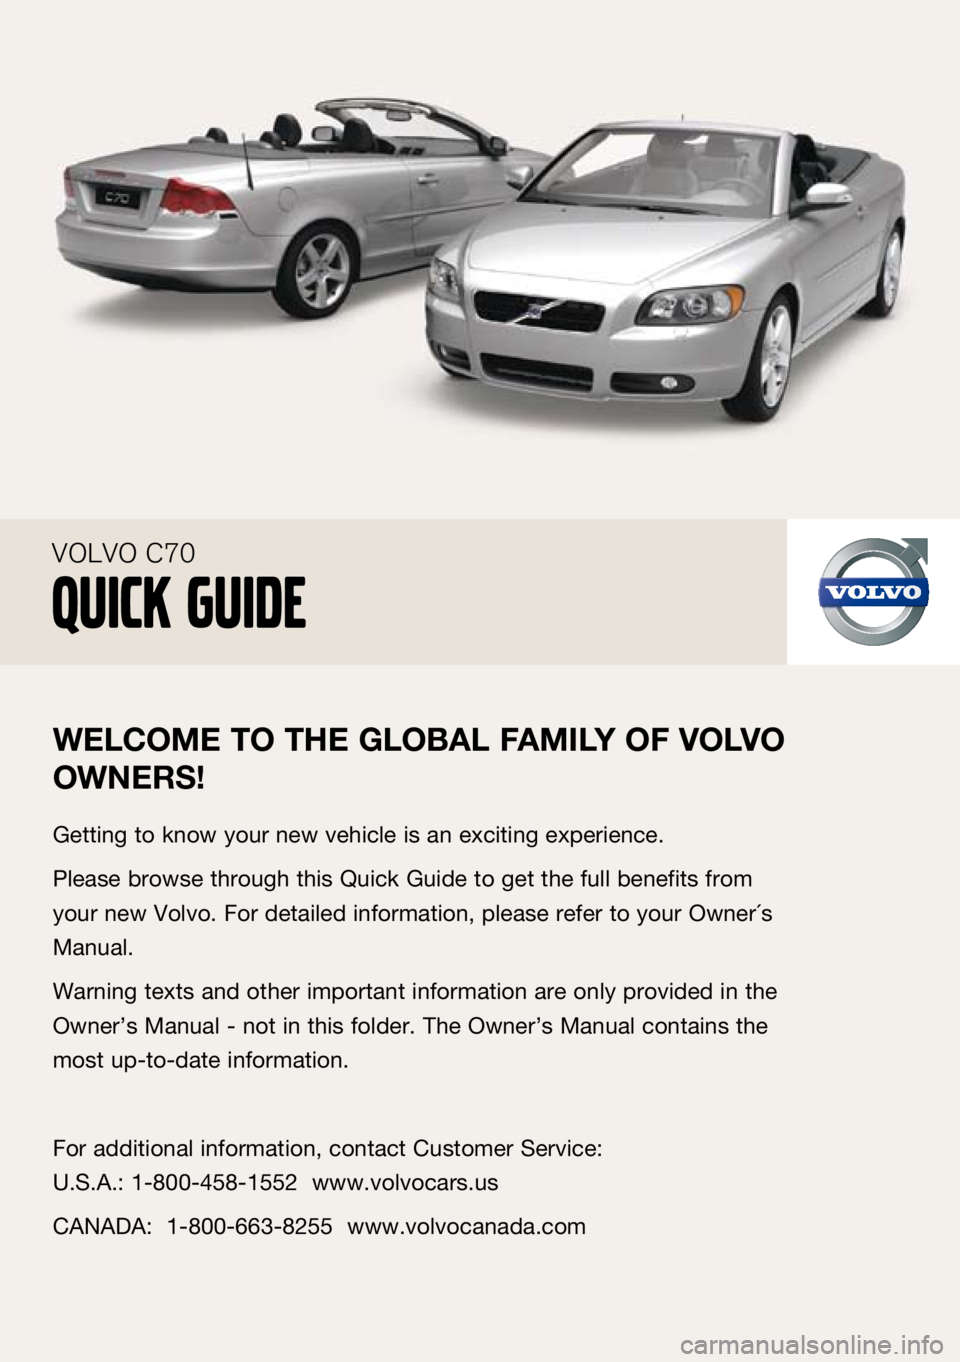 VOLVO C70 CONVERTIBLE 2009  Quick Guide 
Welc Ome TO T he glObAl FA mIly OF  vO lv O 
OW neRS!
Getting to know your new vehicle is an exciting experience.
Please browse through this Quick Guide to get the full benefits from 
your new Volvo.